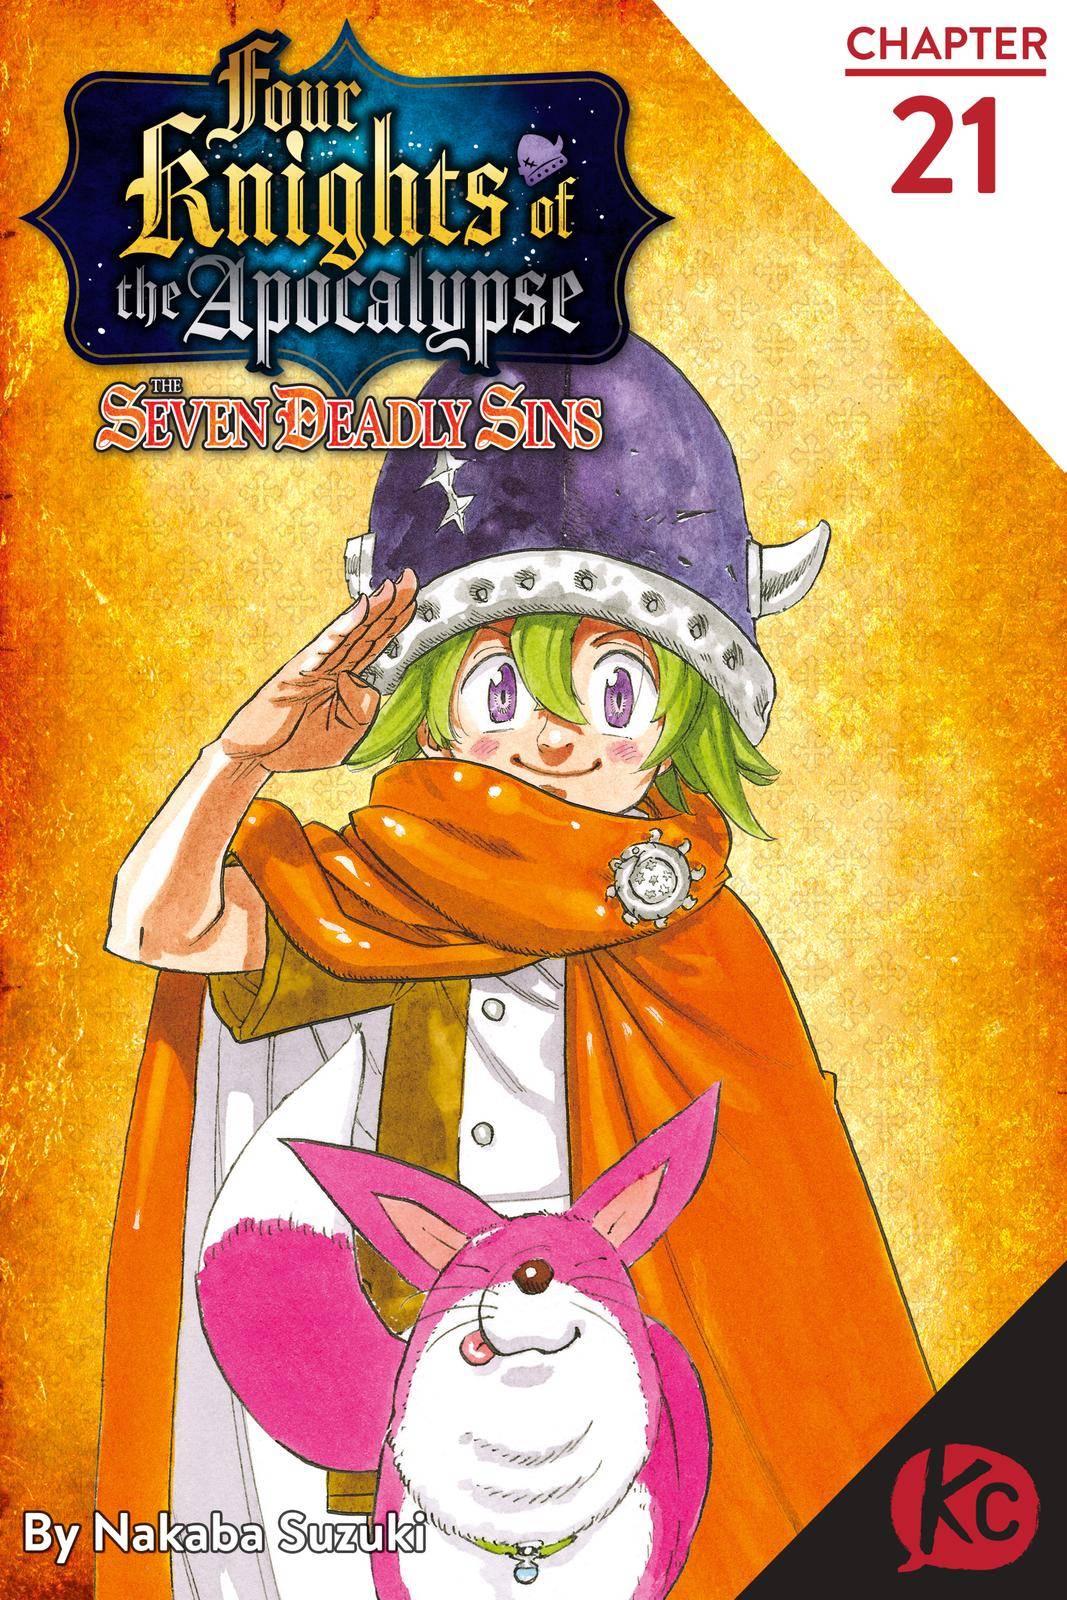 The Seven Deadly Sins: Four Knights of the Apocalypse Chapter 21